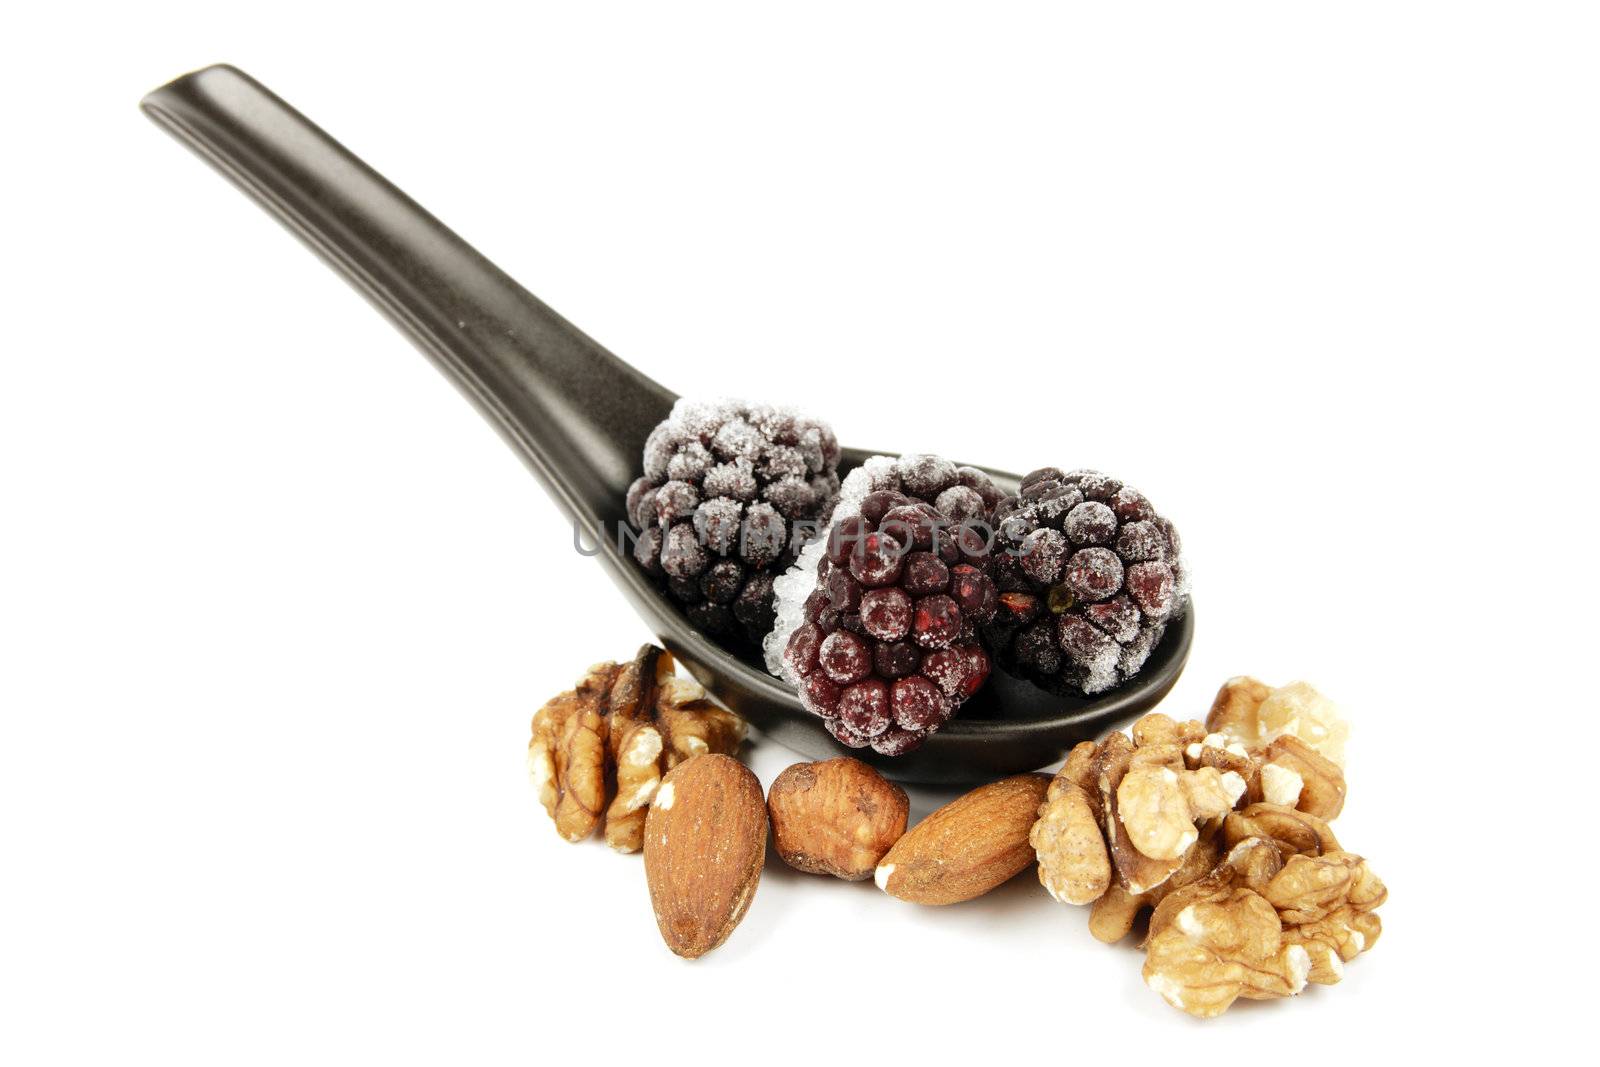 Frozen Blackberries on a Spoon with Nuts by KeithWilson